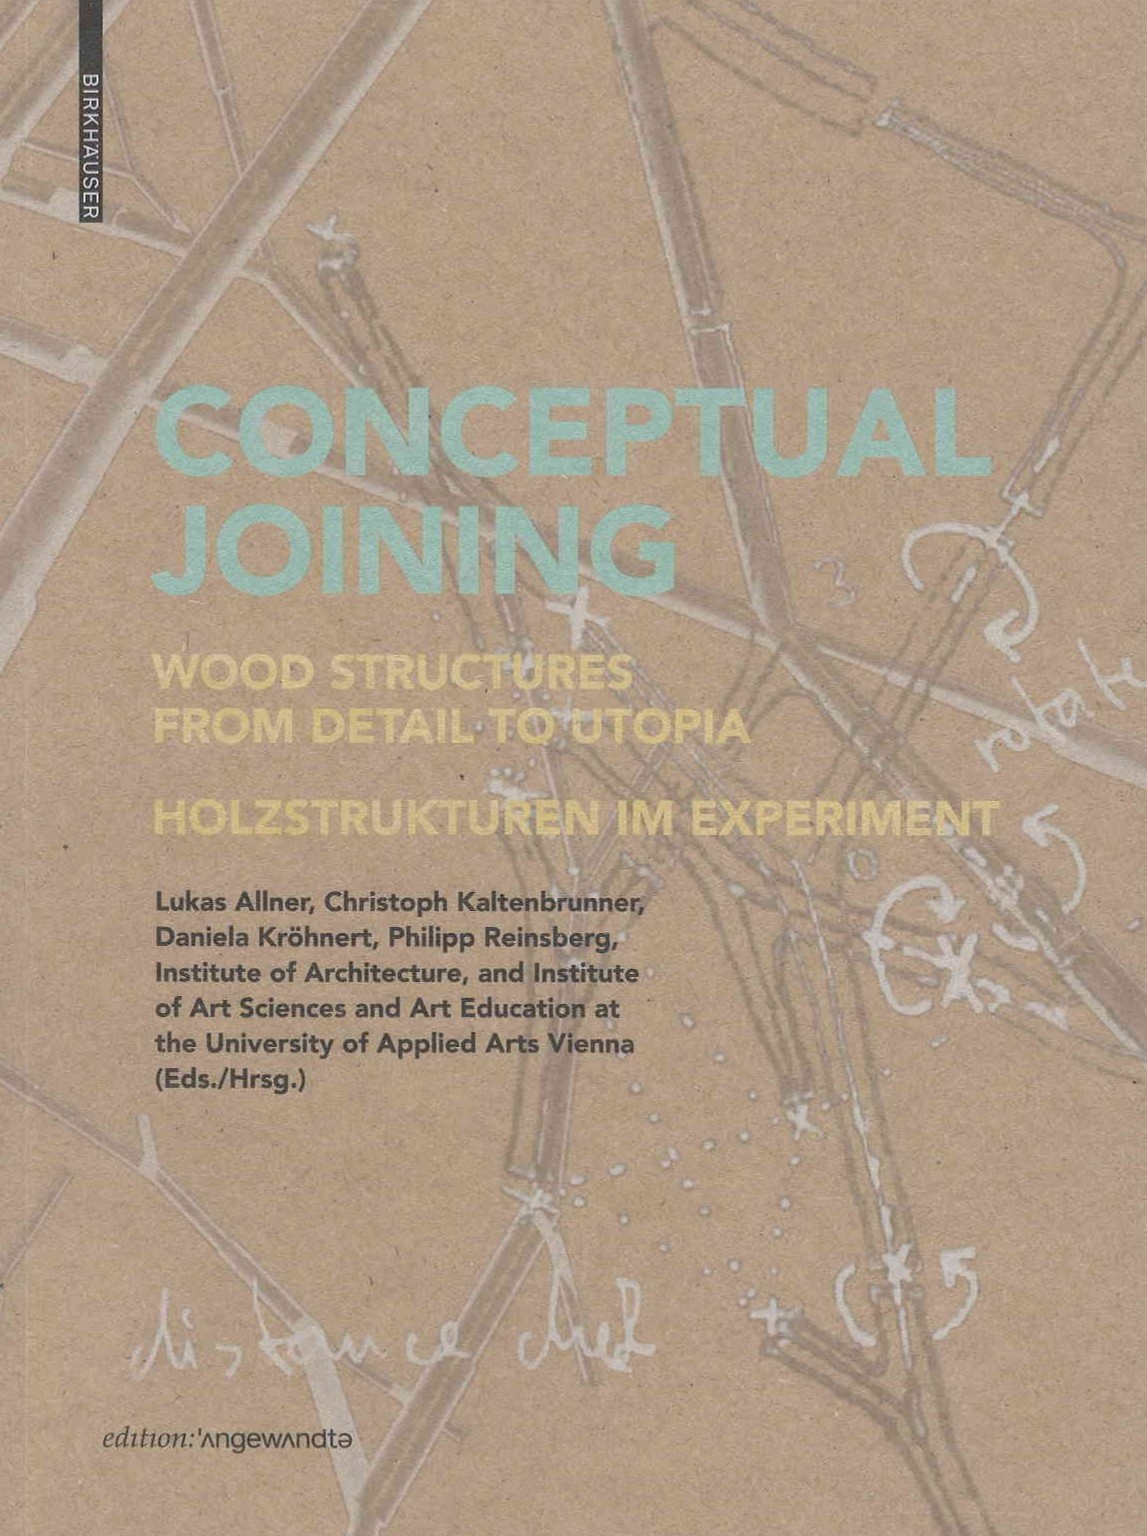 Conceptual joining : wood structures from detail to utopia